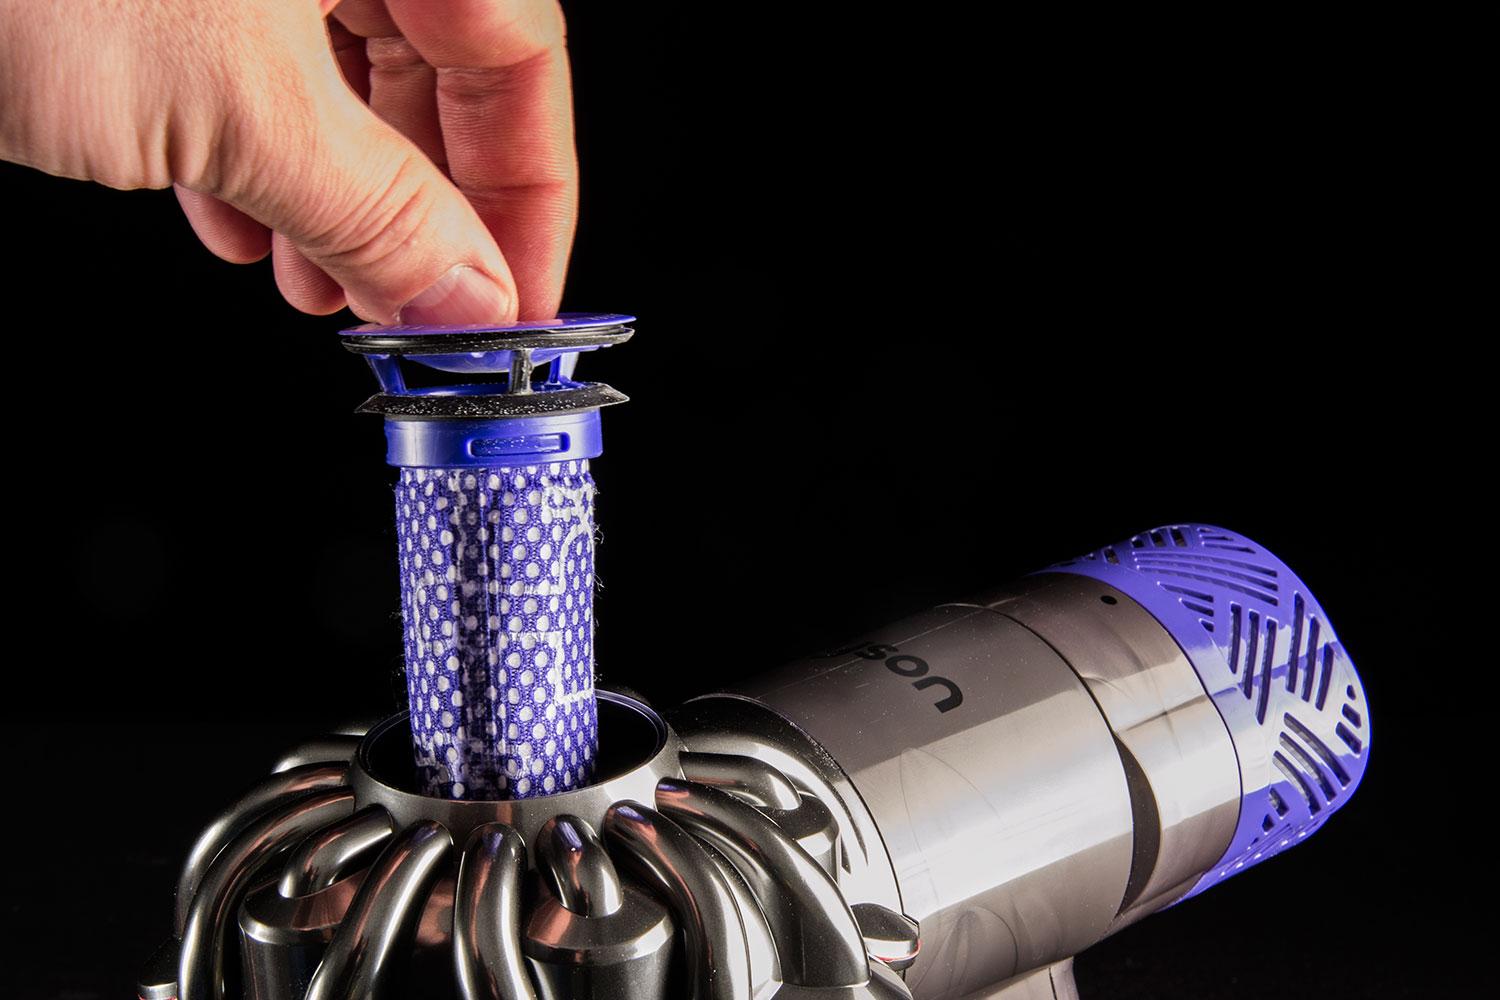 How to Change Filters for Dyson V6 Absolute Vacuums by VEVA 